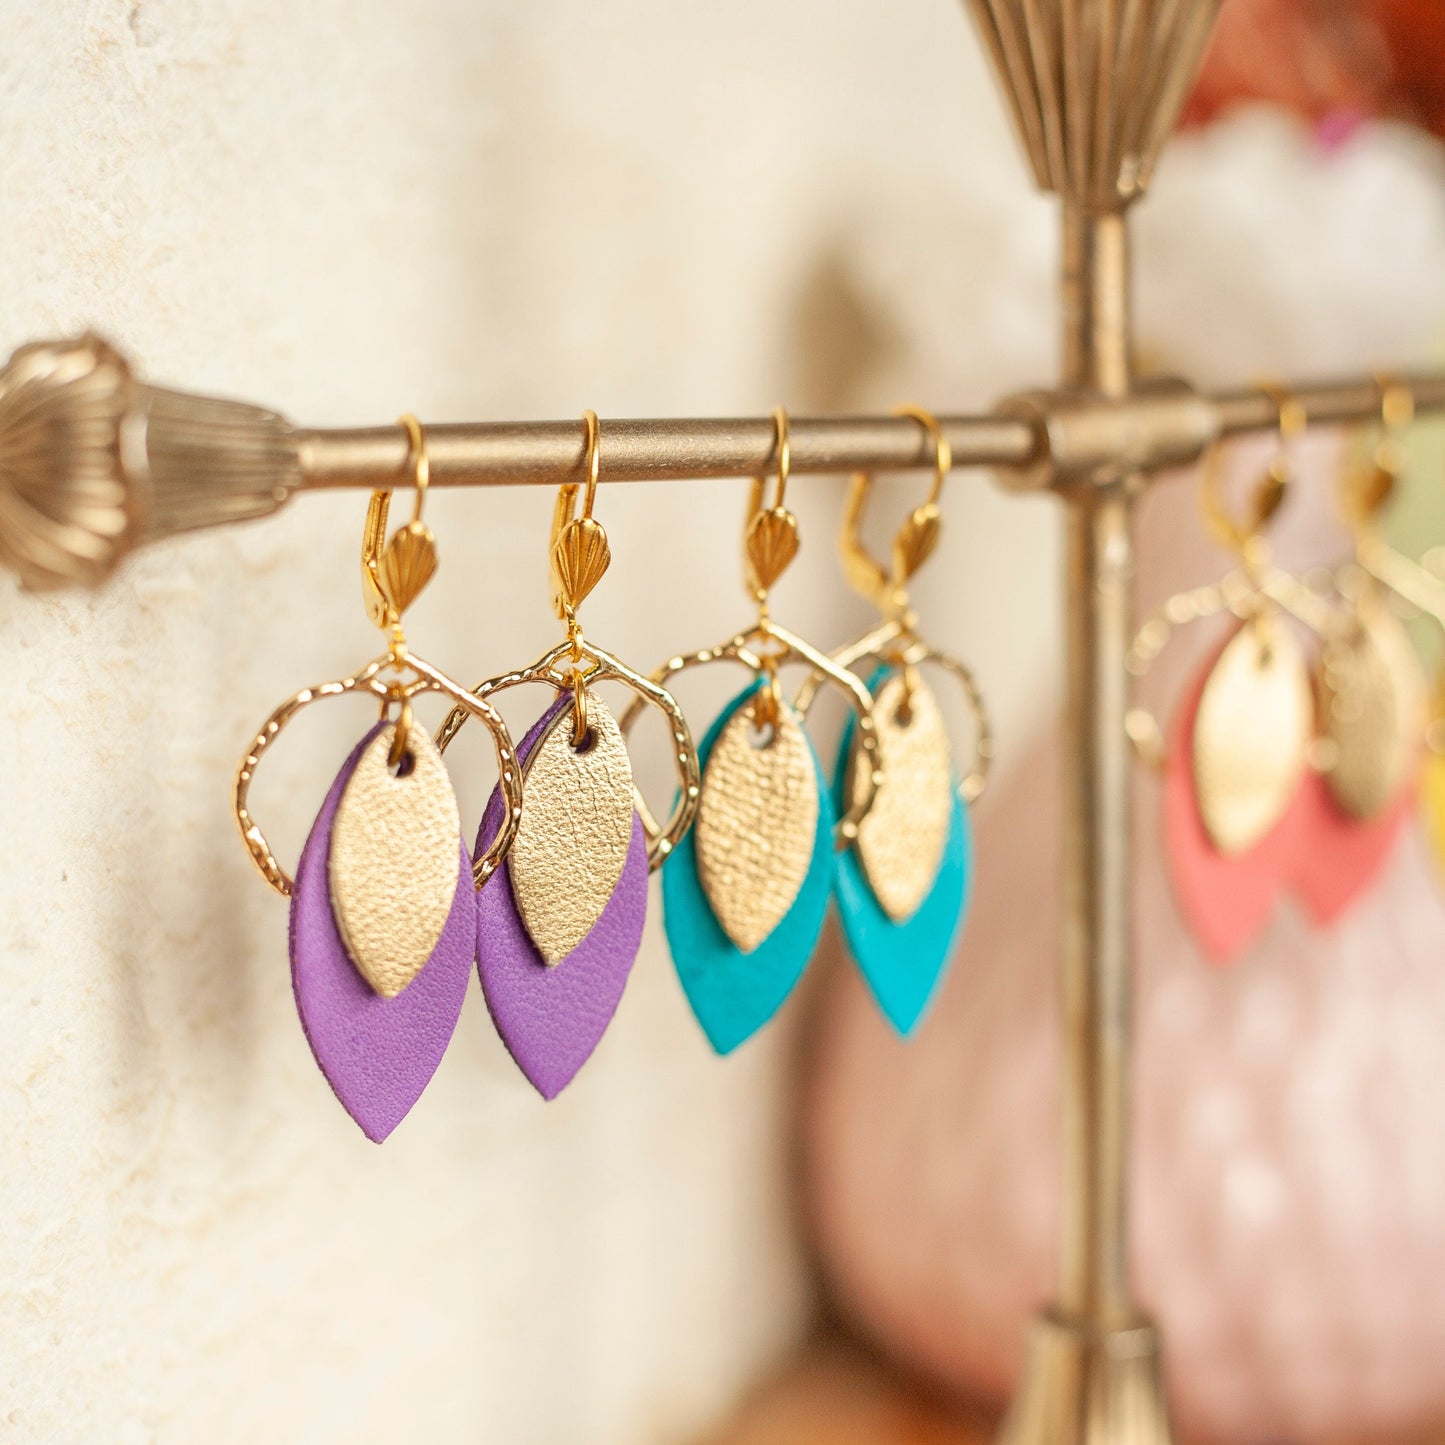 Purple and gold leather hoop earrings